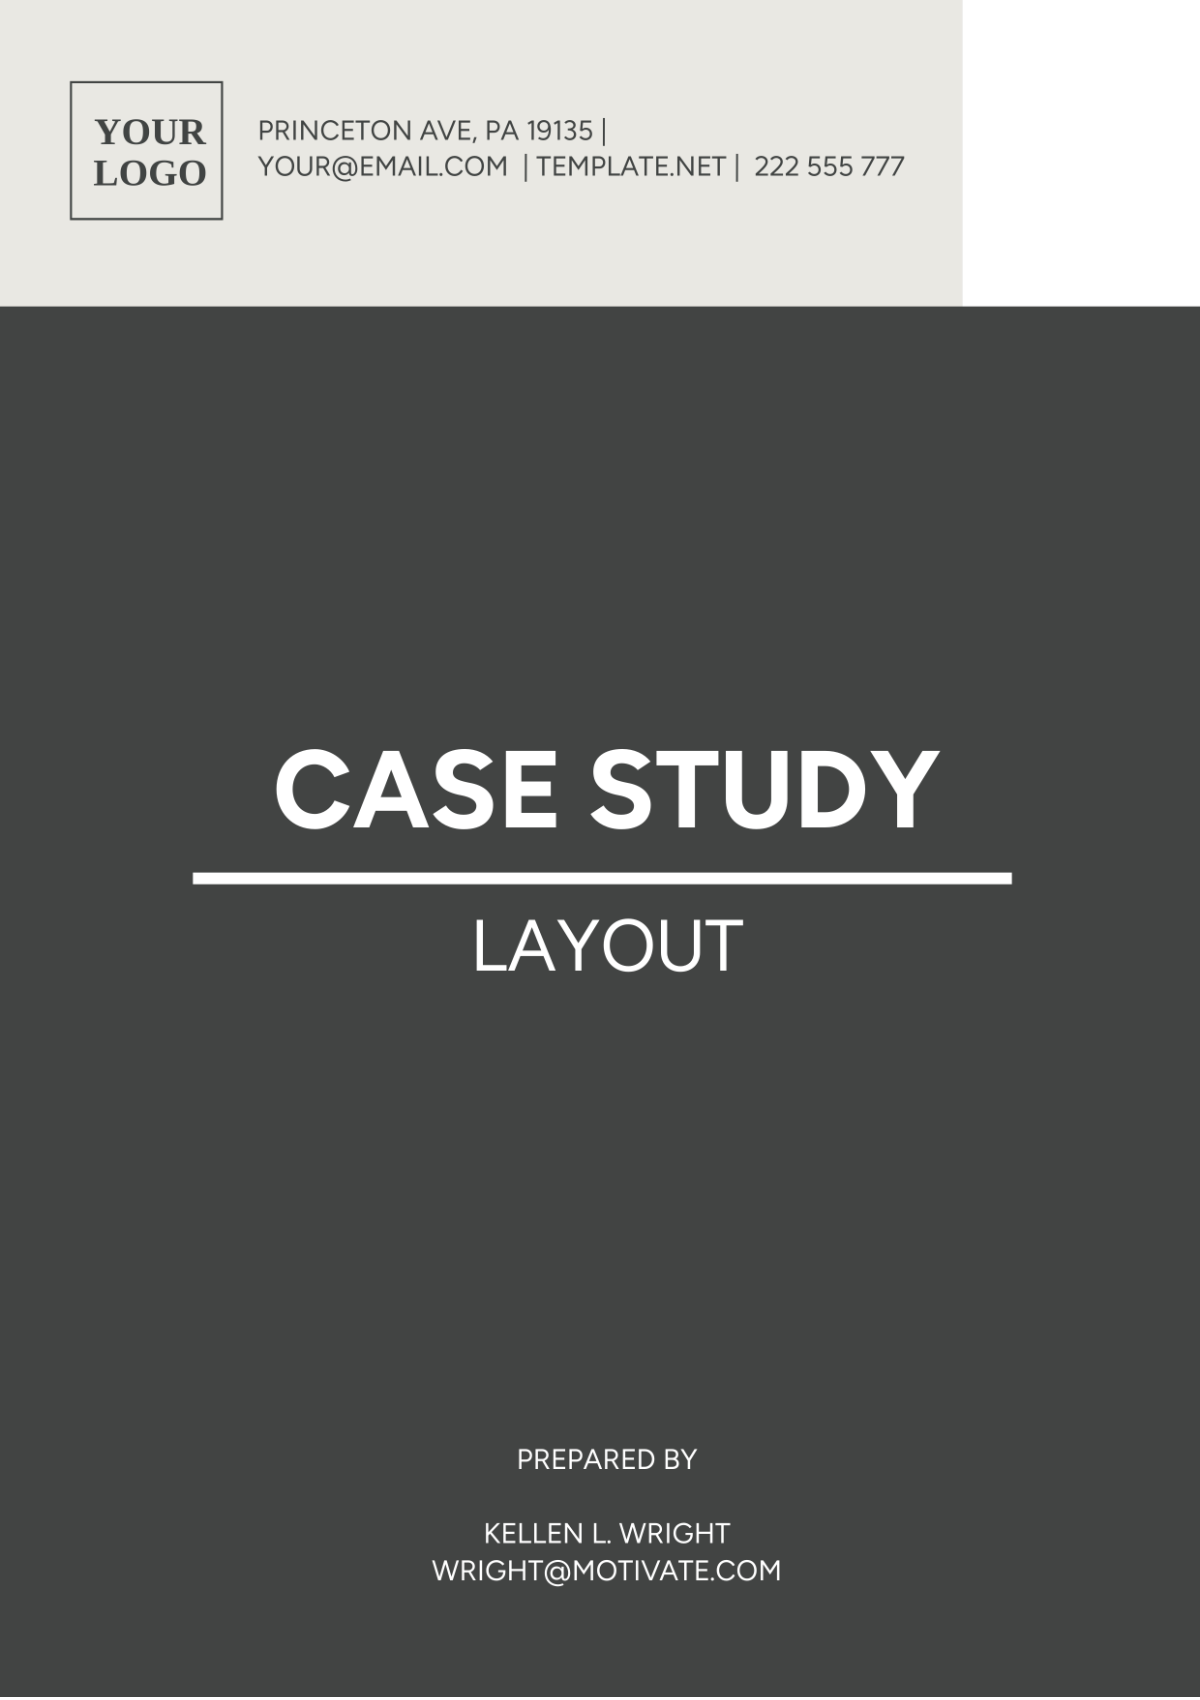 Free Case Study Layout Template